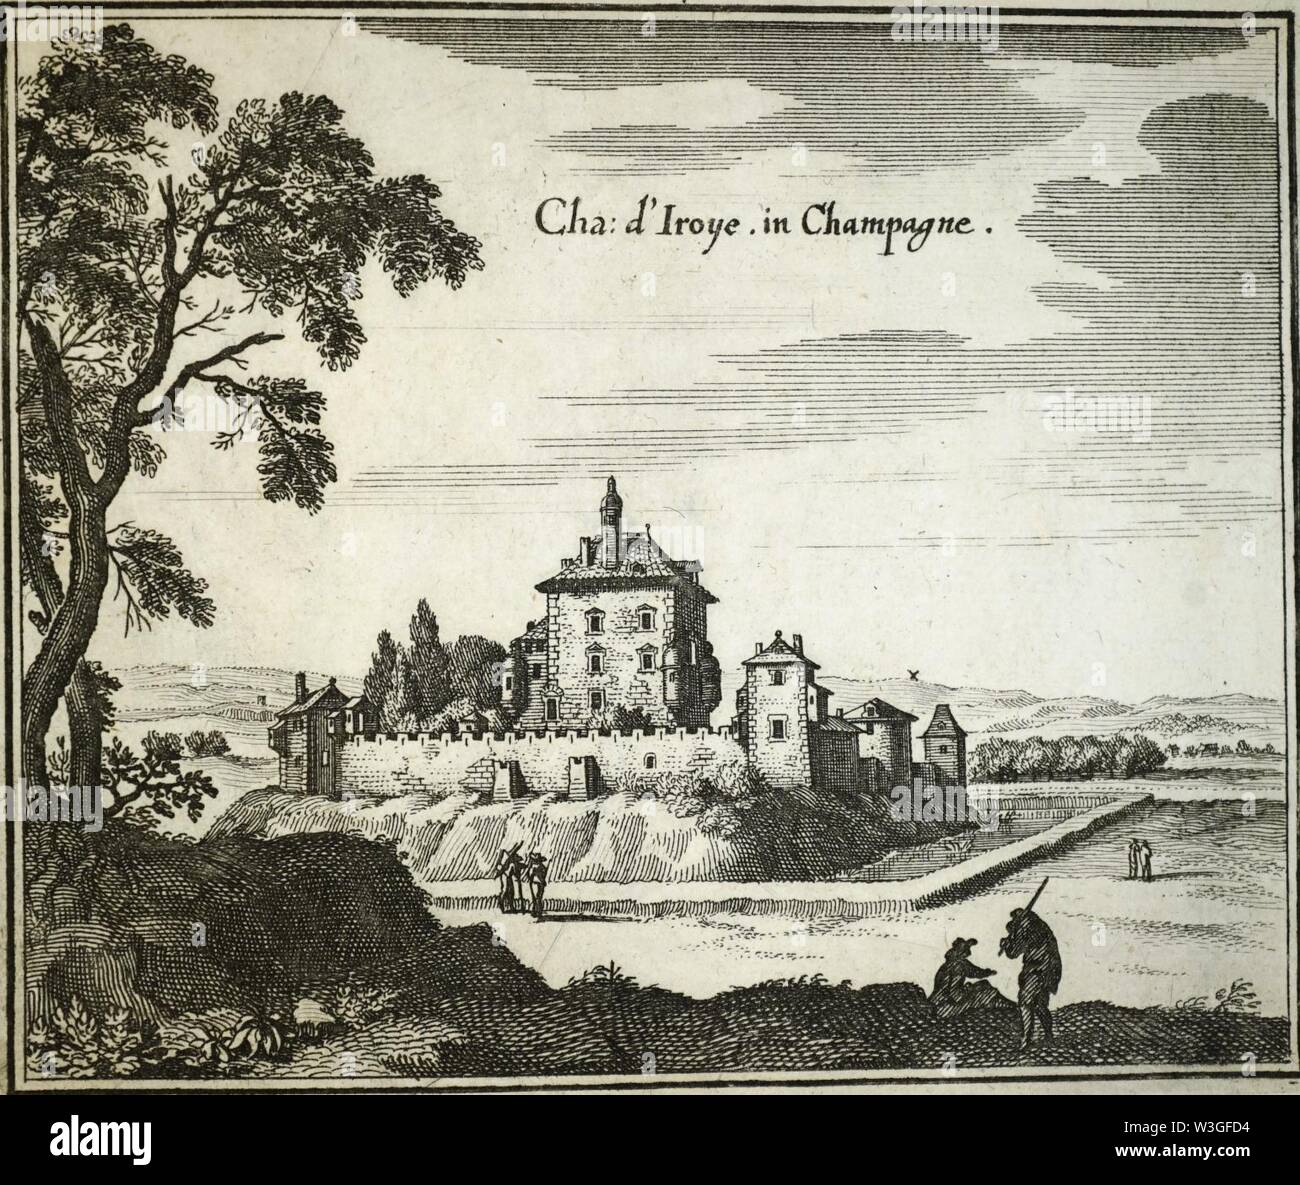 Château Iroye 16189. Banque D'Images